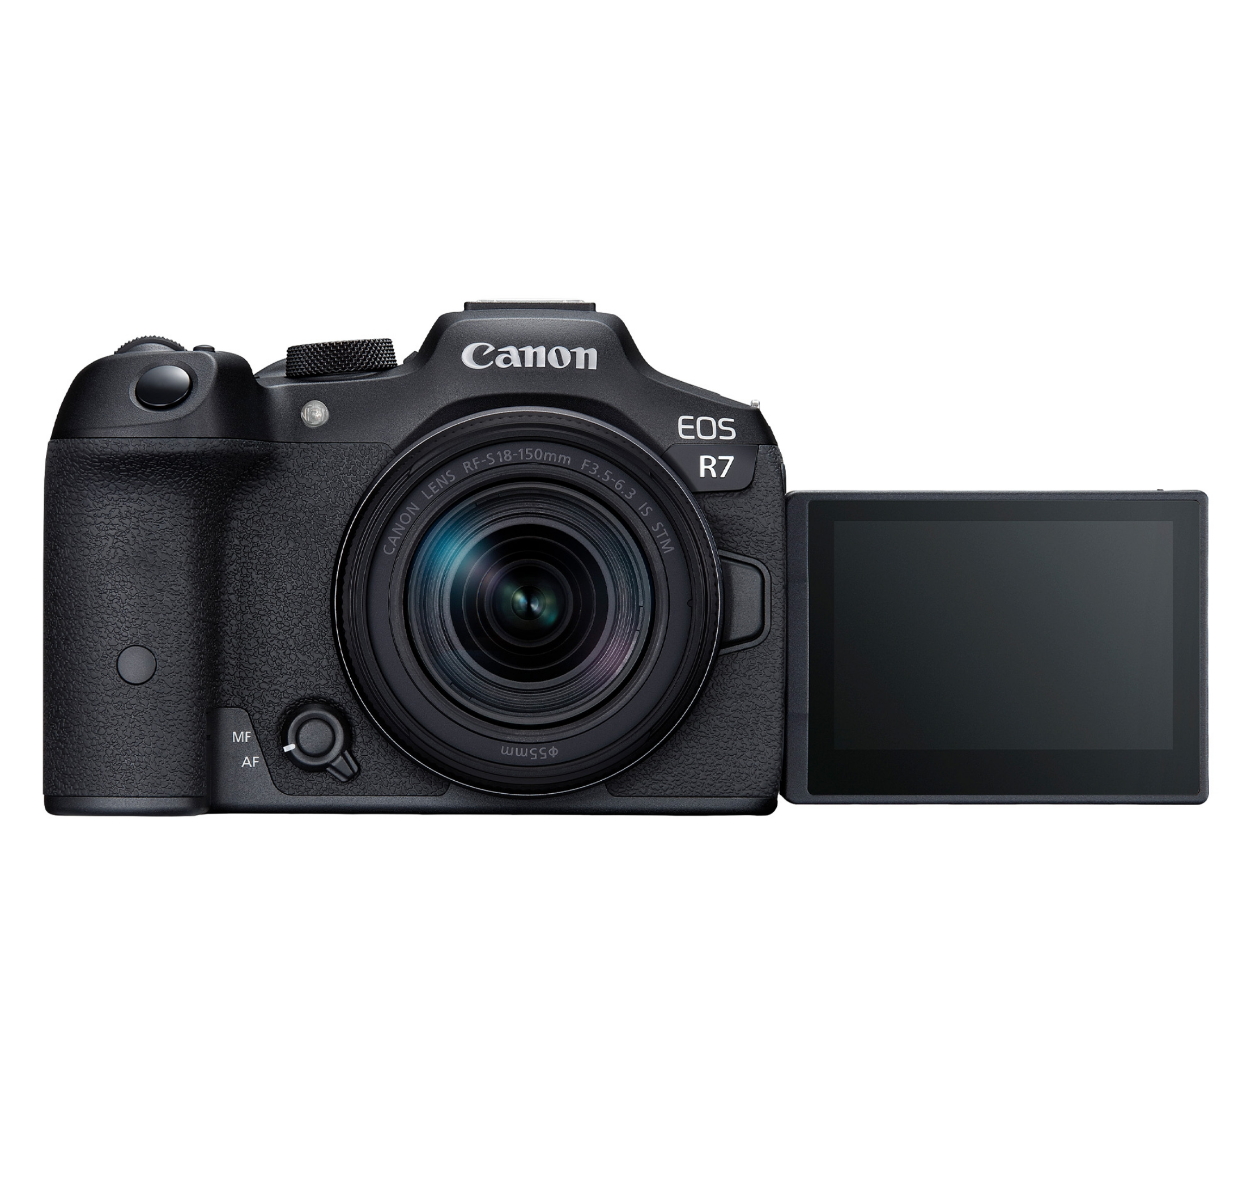 Canon EOS R7 Mirrorless Camera with RF-S 18-150mm Lens Kit